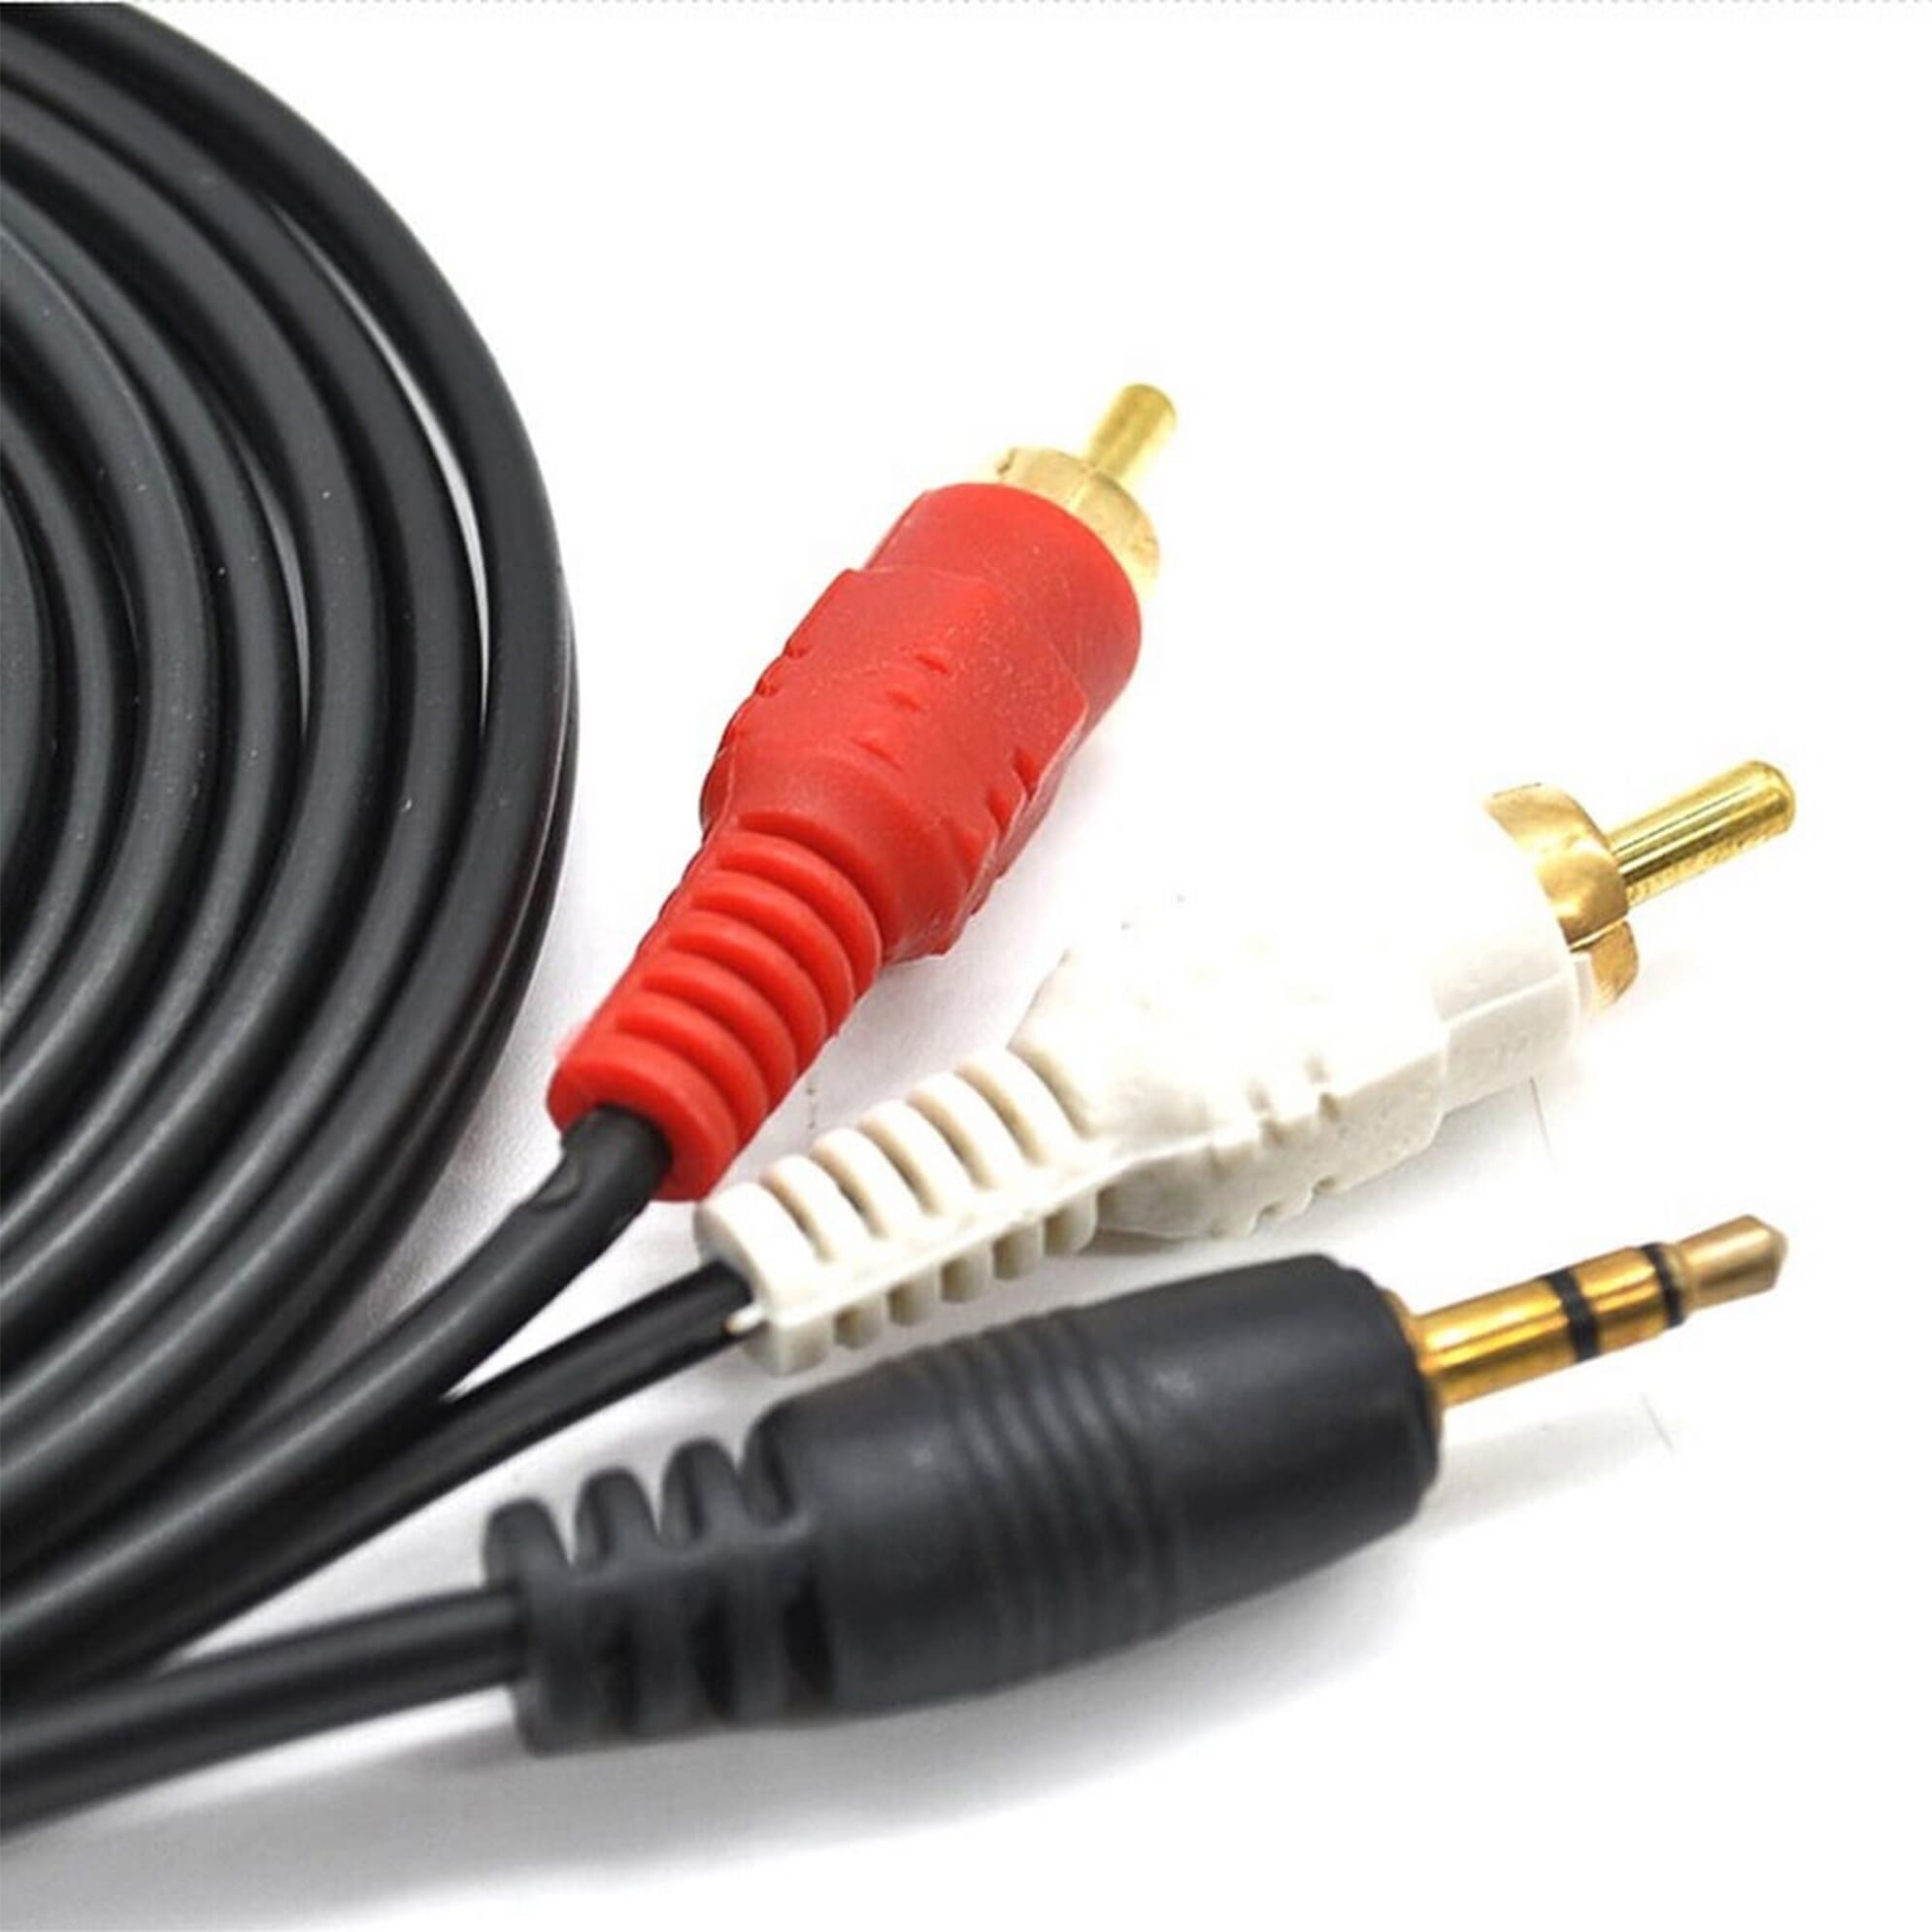 5M 3.5mm Stereo Male Jack to 2 RCA Male AV cable -Black